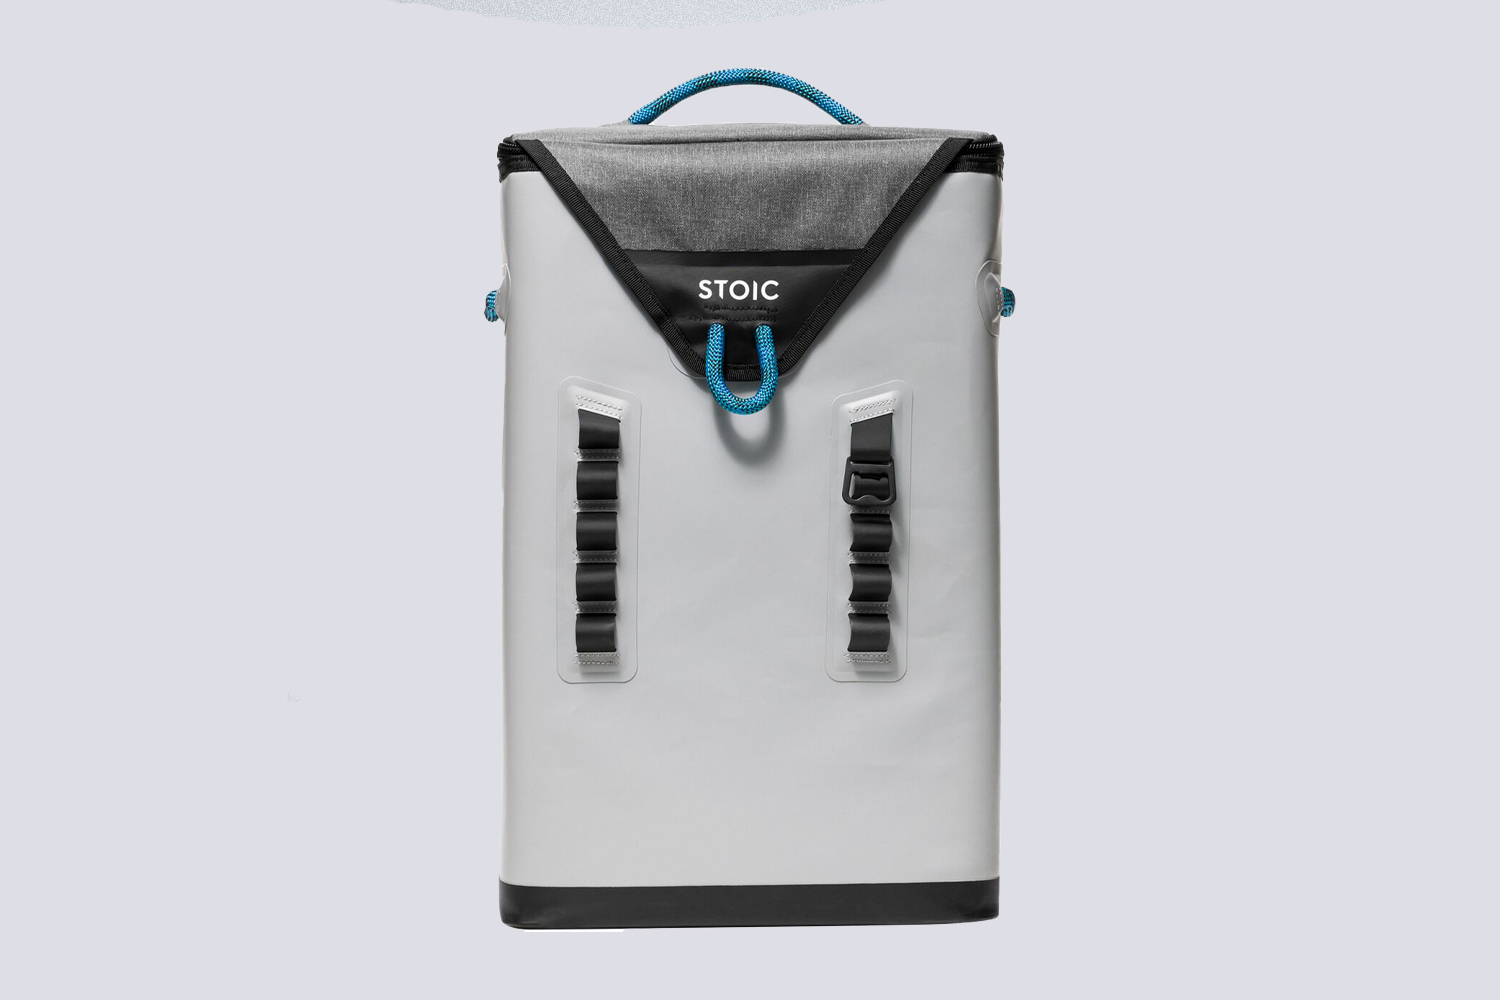 The Stoic Hybrid Backpack Cooler is one of the best backpack coolers in 2022